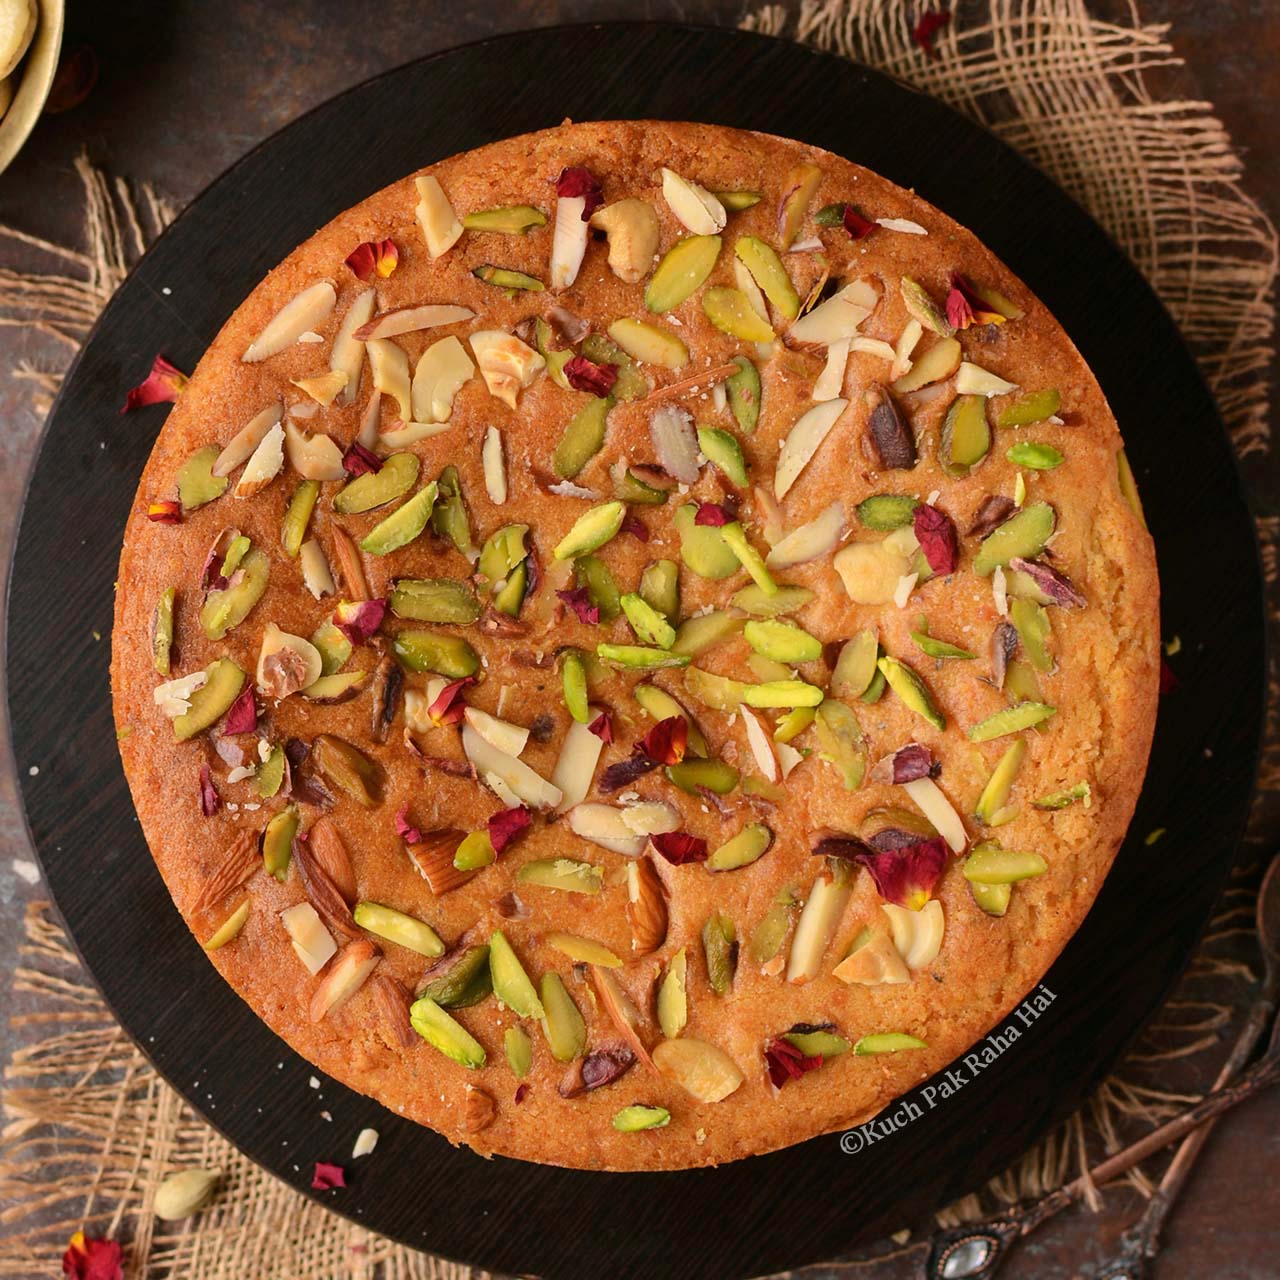 Eggless Mawa Cake with nuts served on black plate.